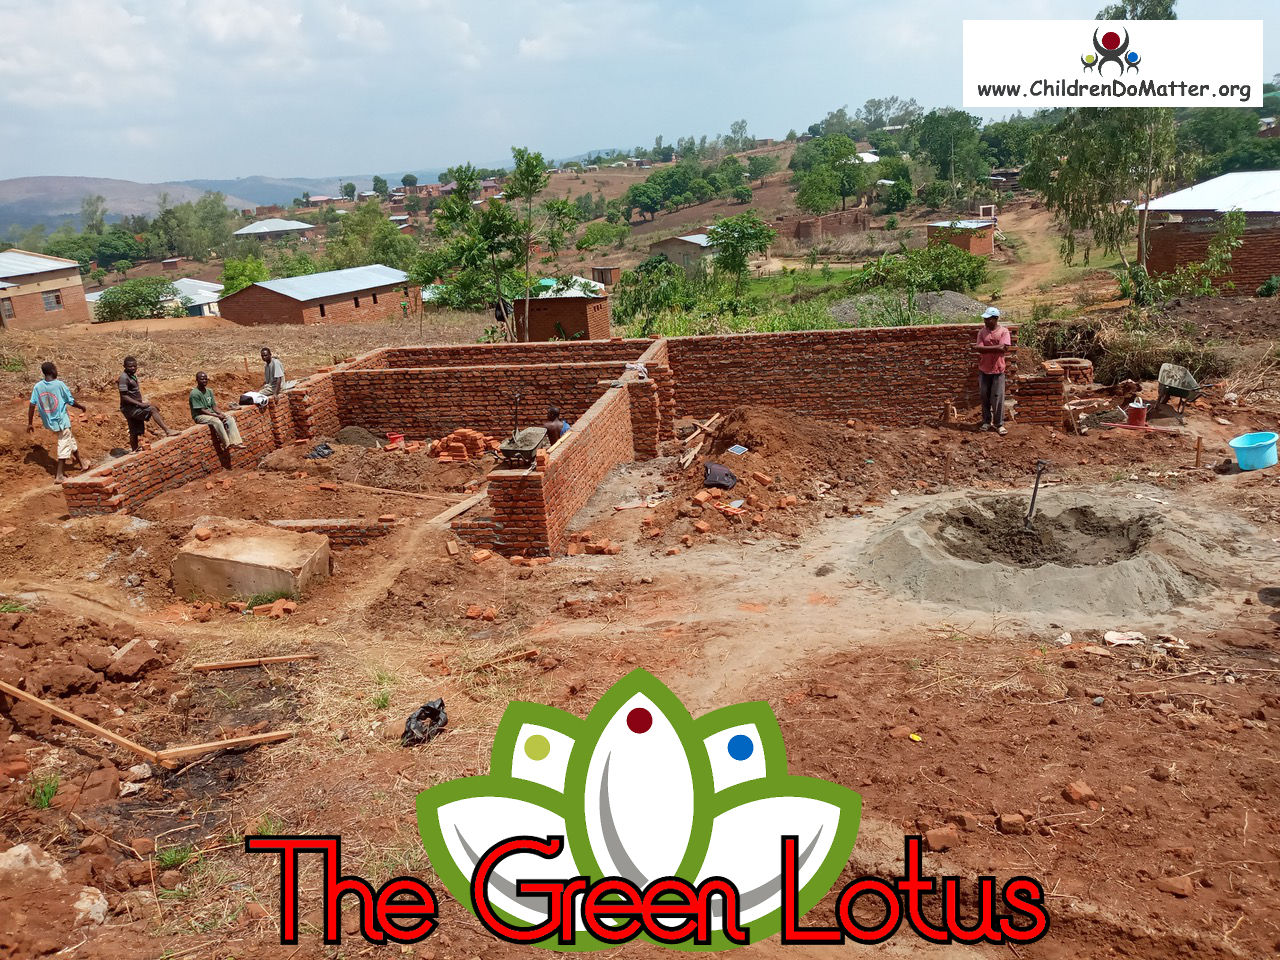 the making of the green lotus orphanage in blantyre malawi - children do matter - 6